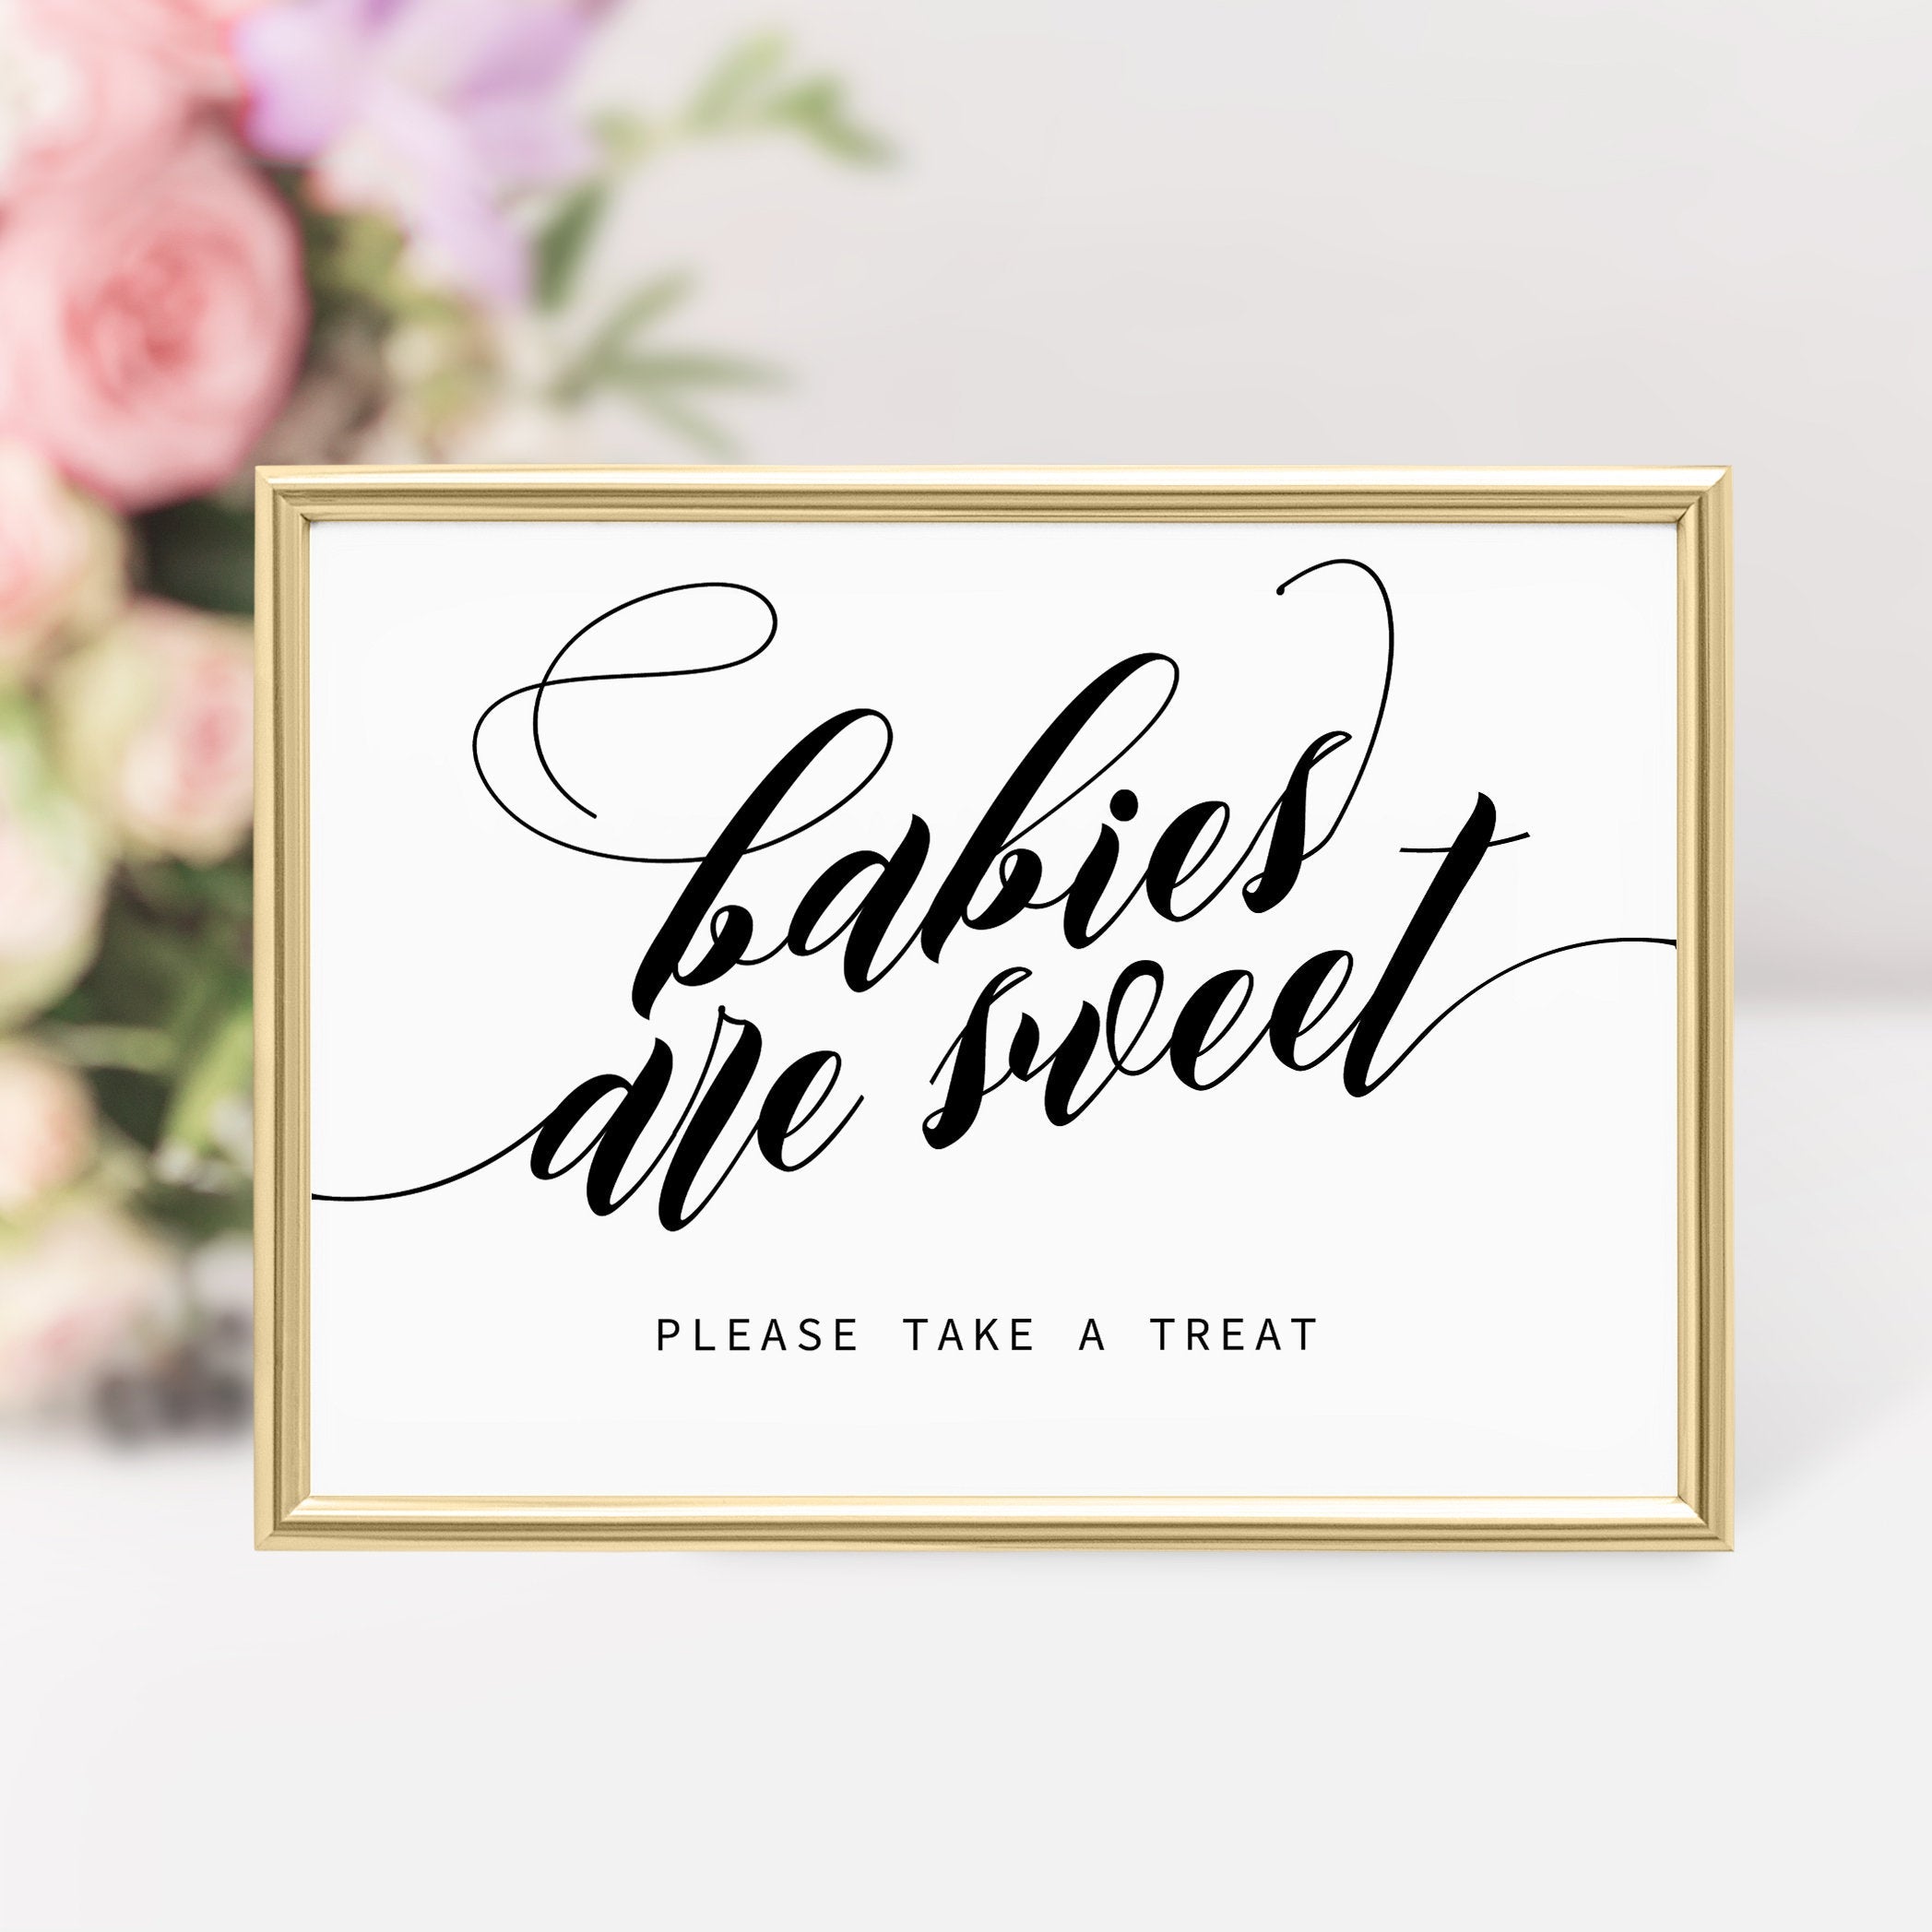 Babies are Sweet Sign, Baby Shower Sign Dessert Table, Baby Shower Decorations, DIGITAL DOWNLOAD - SFB100 - @PlumPolkaDot 